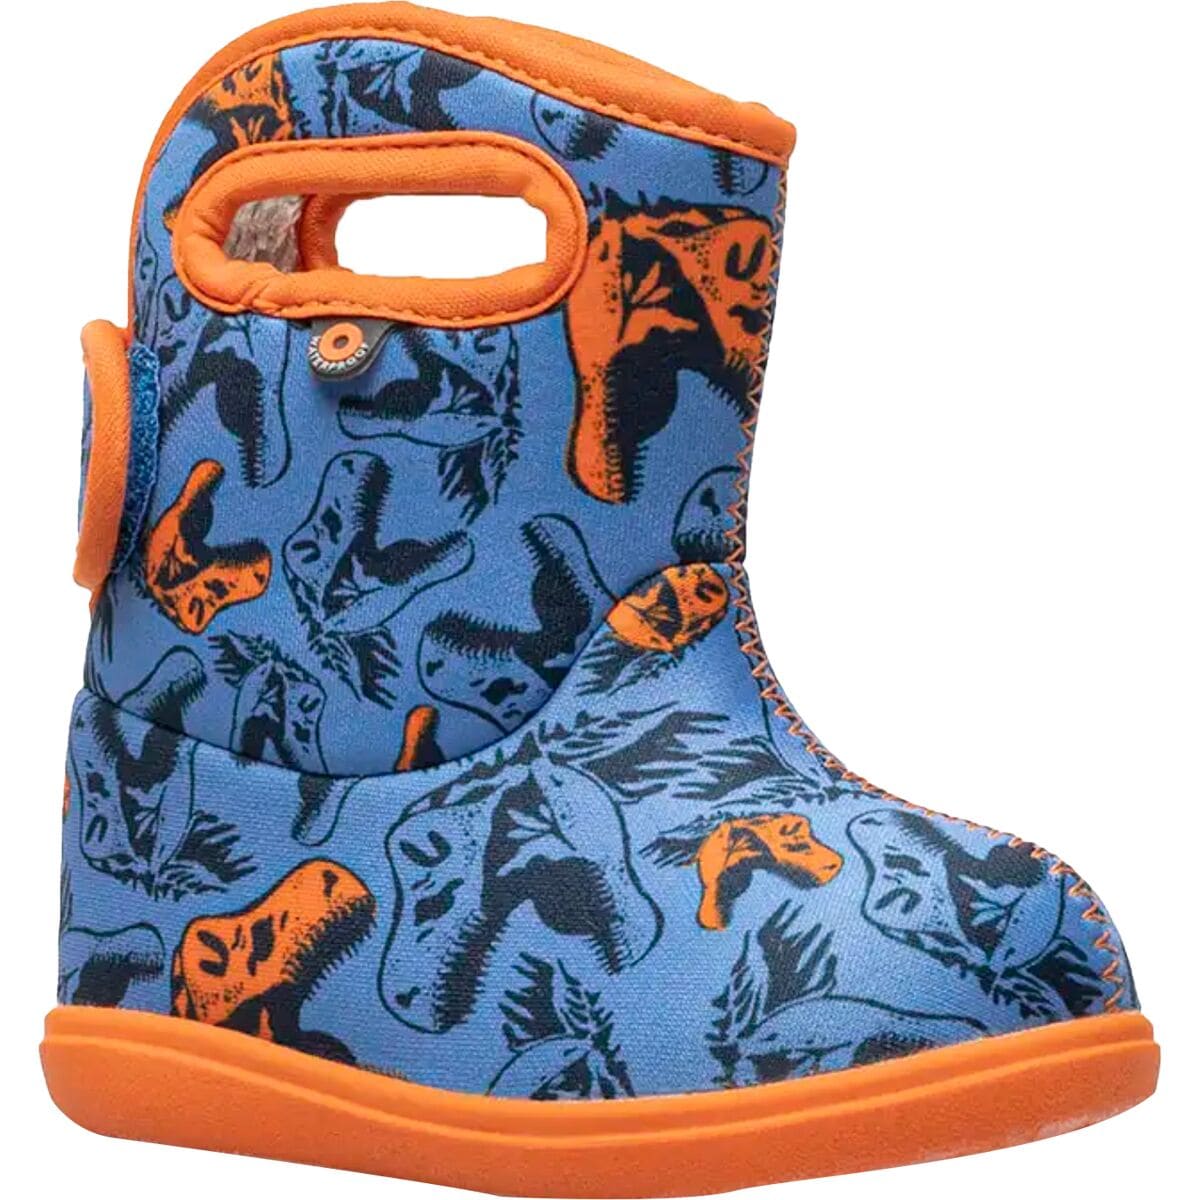 Bogs Baby Bog II Classic Dino Boot - Toddlers' - Kids